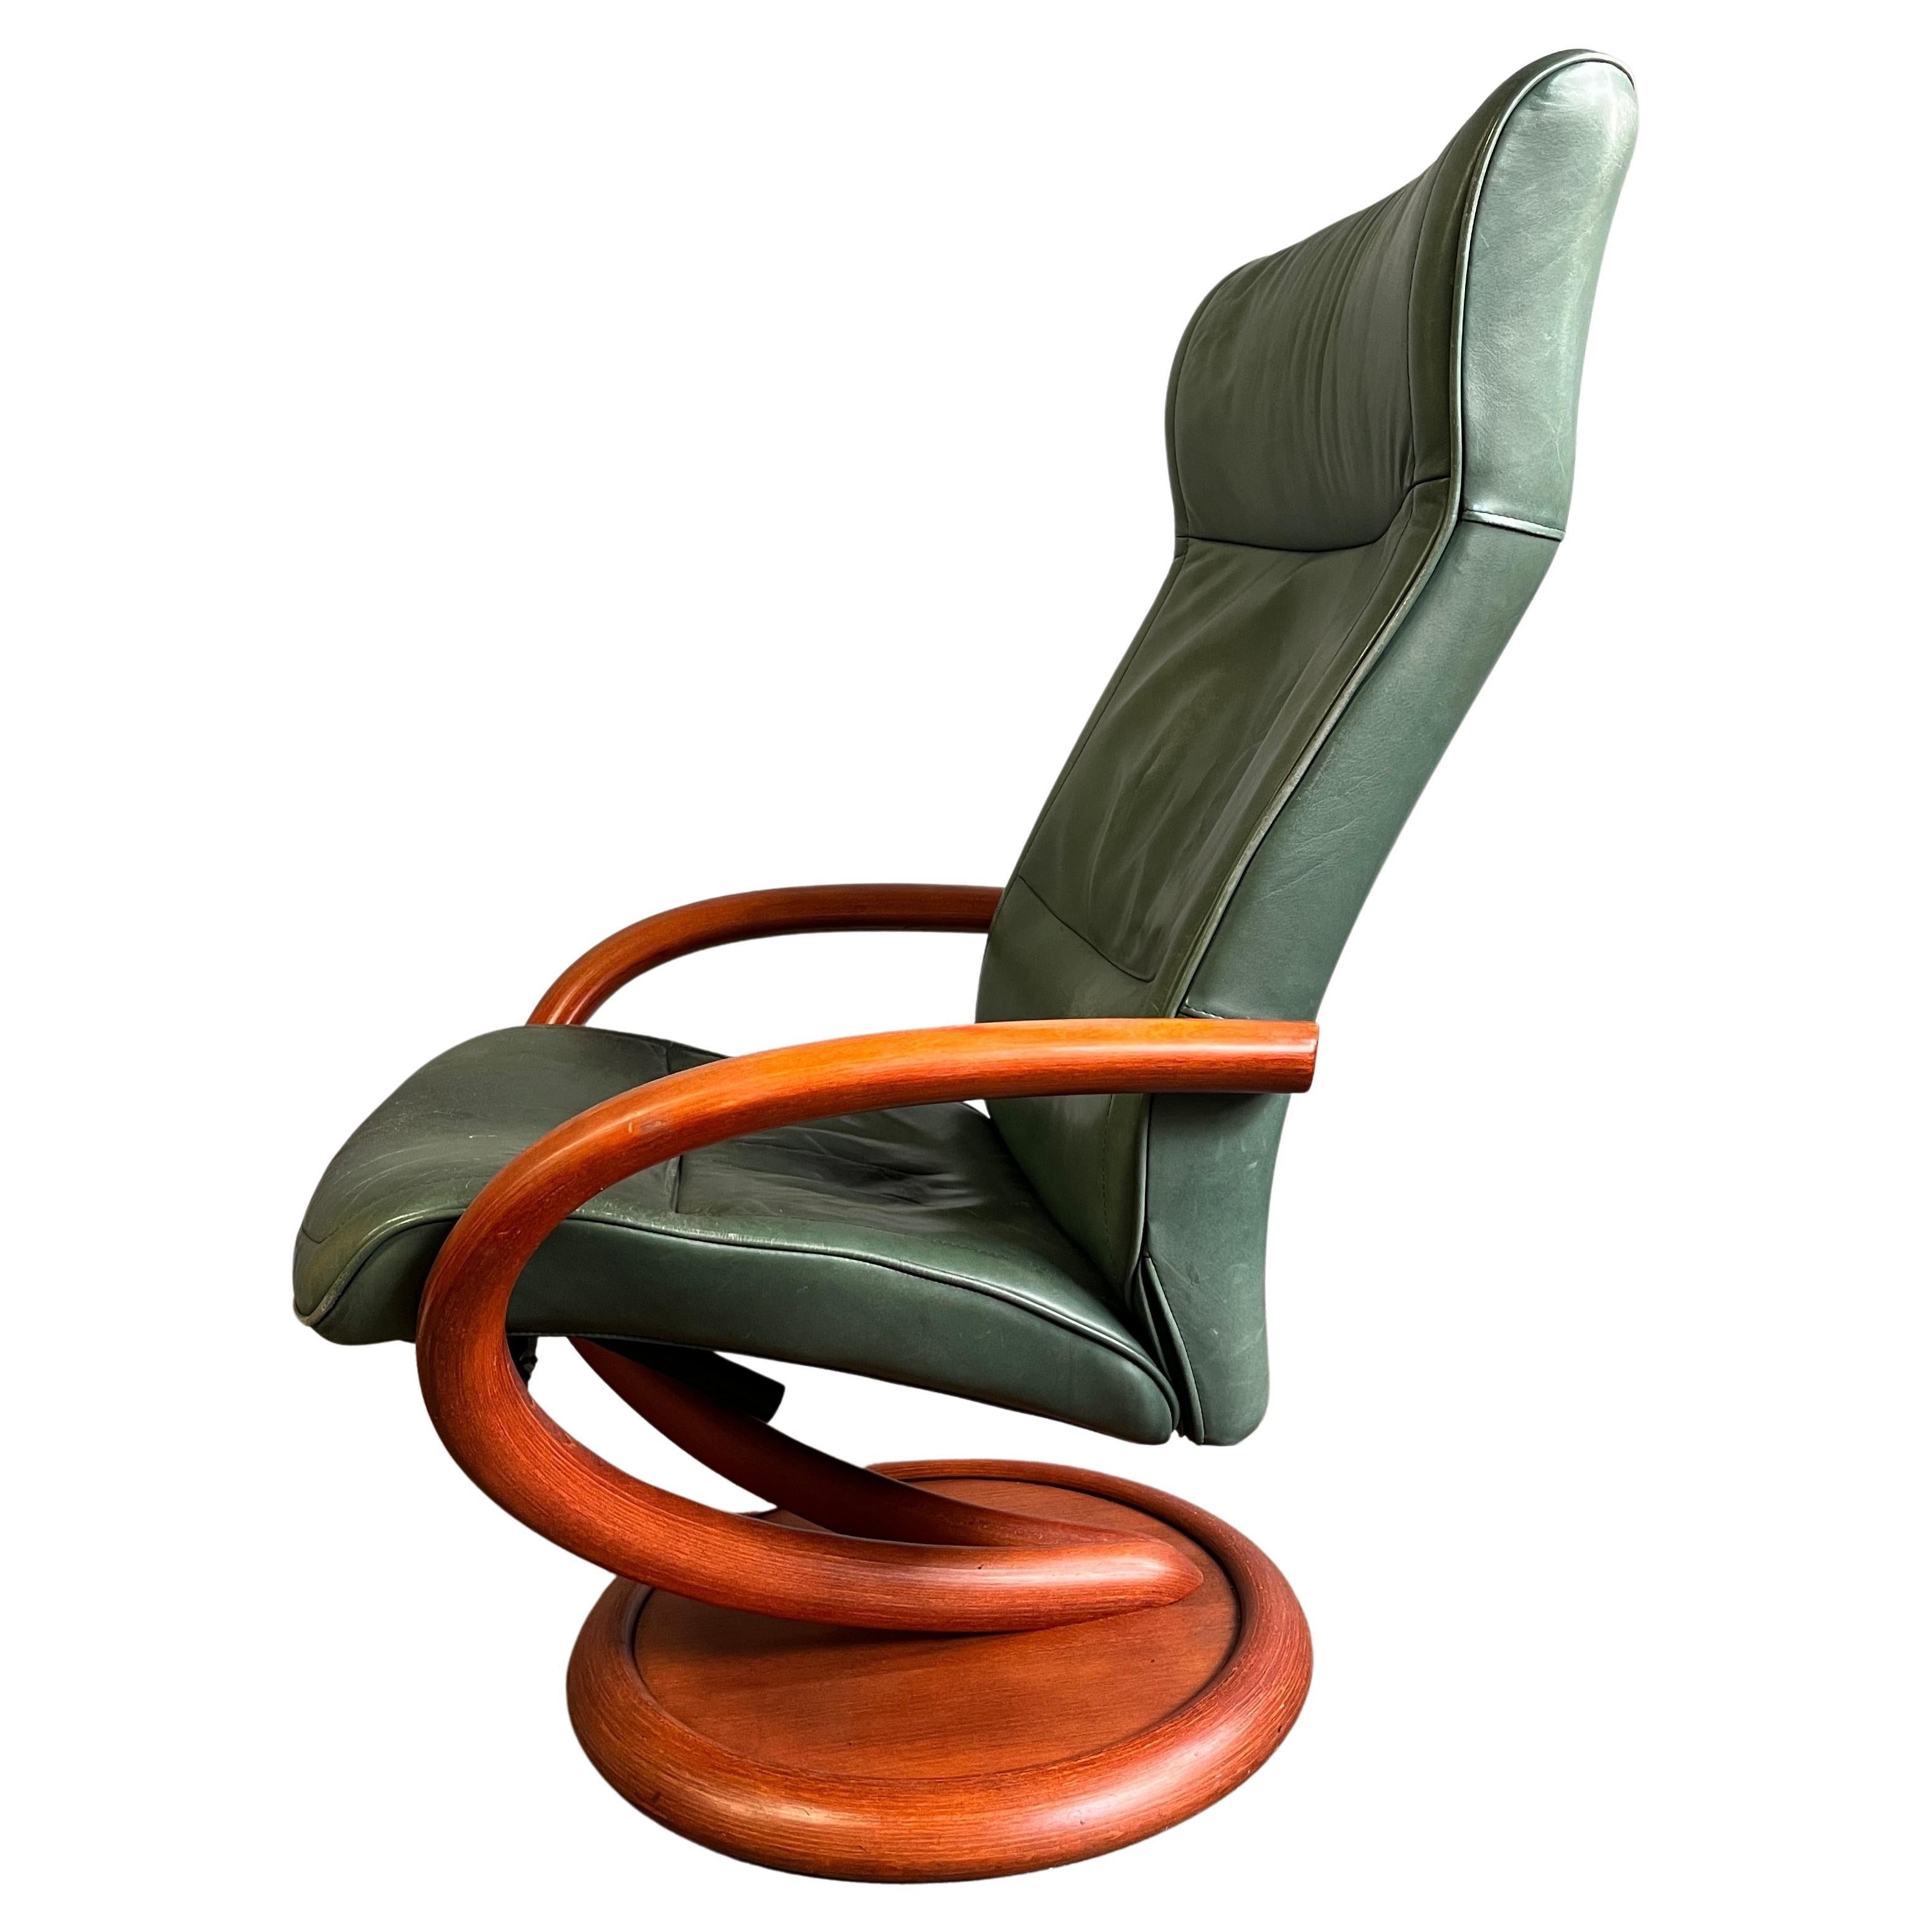 Unique reclining cantilevered lounge chair made of bent wood. This chair also swivels 360'. 

Green leather has some age. Leave as is or recover to your liking. 